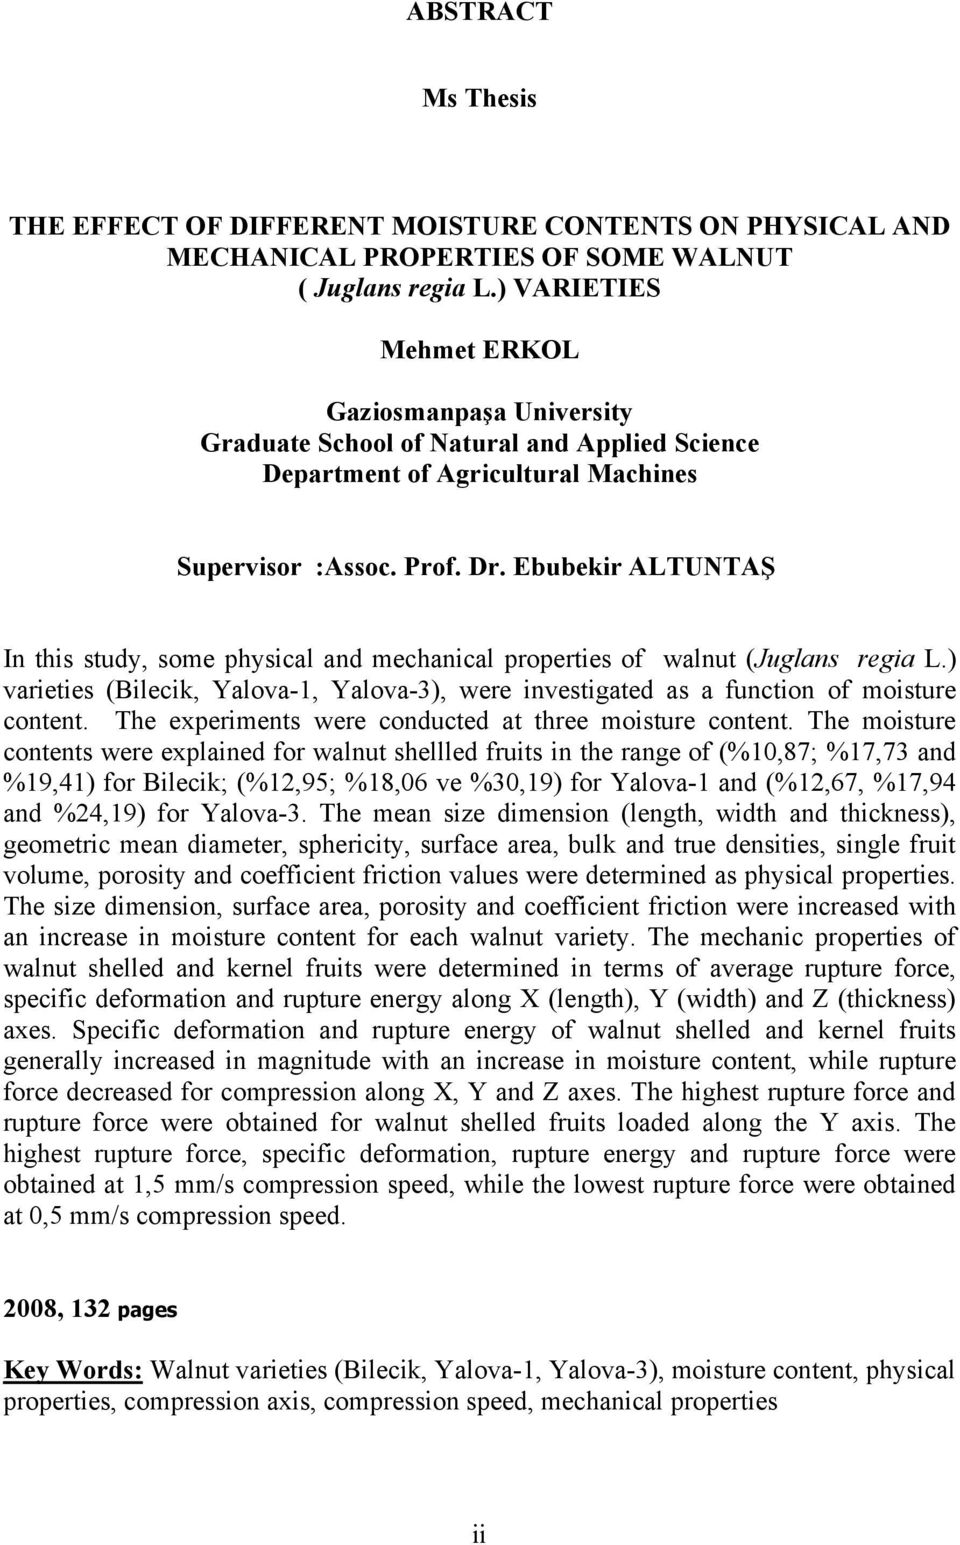 Ebubekir ALTUNTAŞ In this study, some physical and mechanical properties of walnut (Juglans regia L.) varieties (Bilecik, Yalova-1, Yalova-3), were investigated as a function of moisture content.